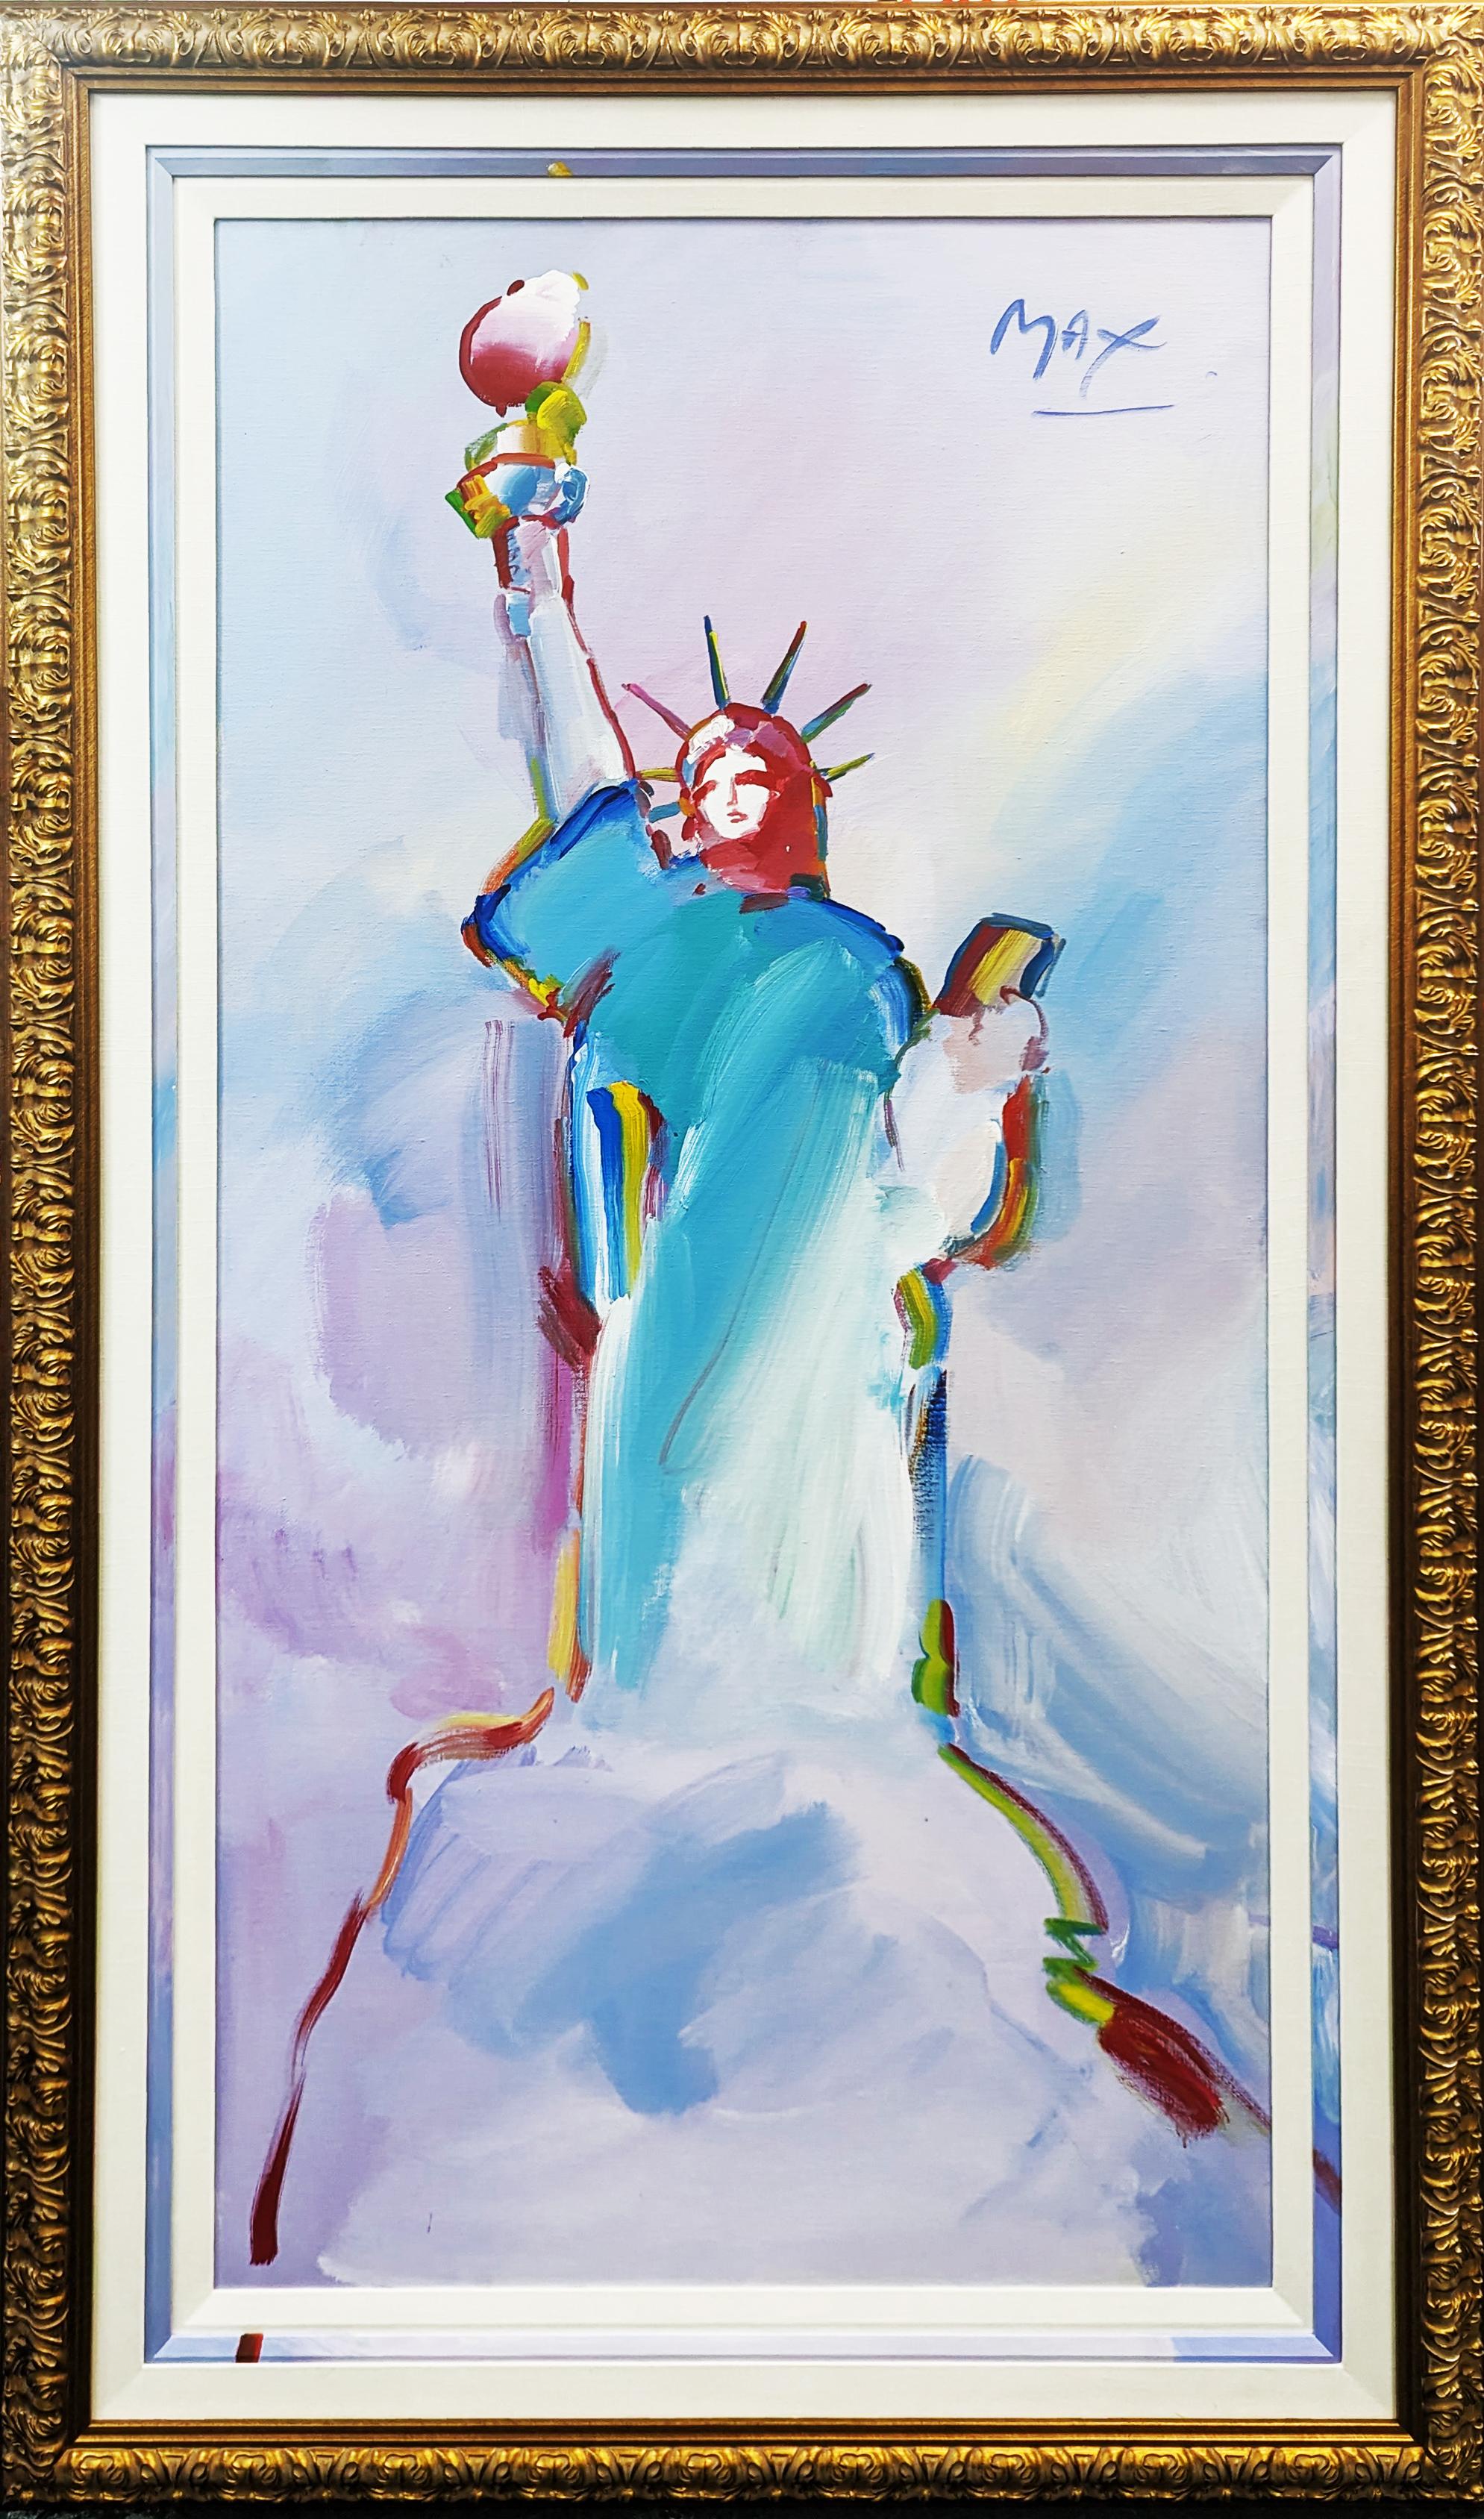 What is Peter Max’s connection to the Statue of Liberty?